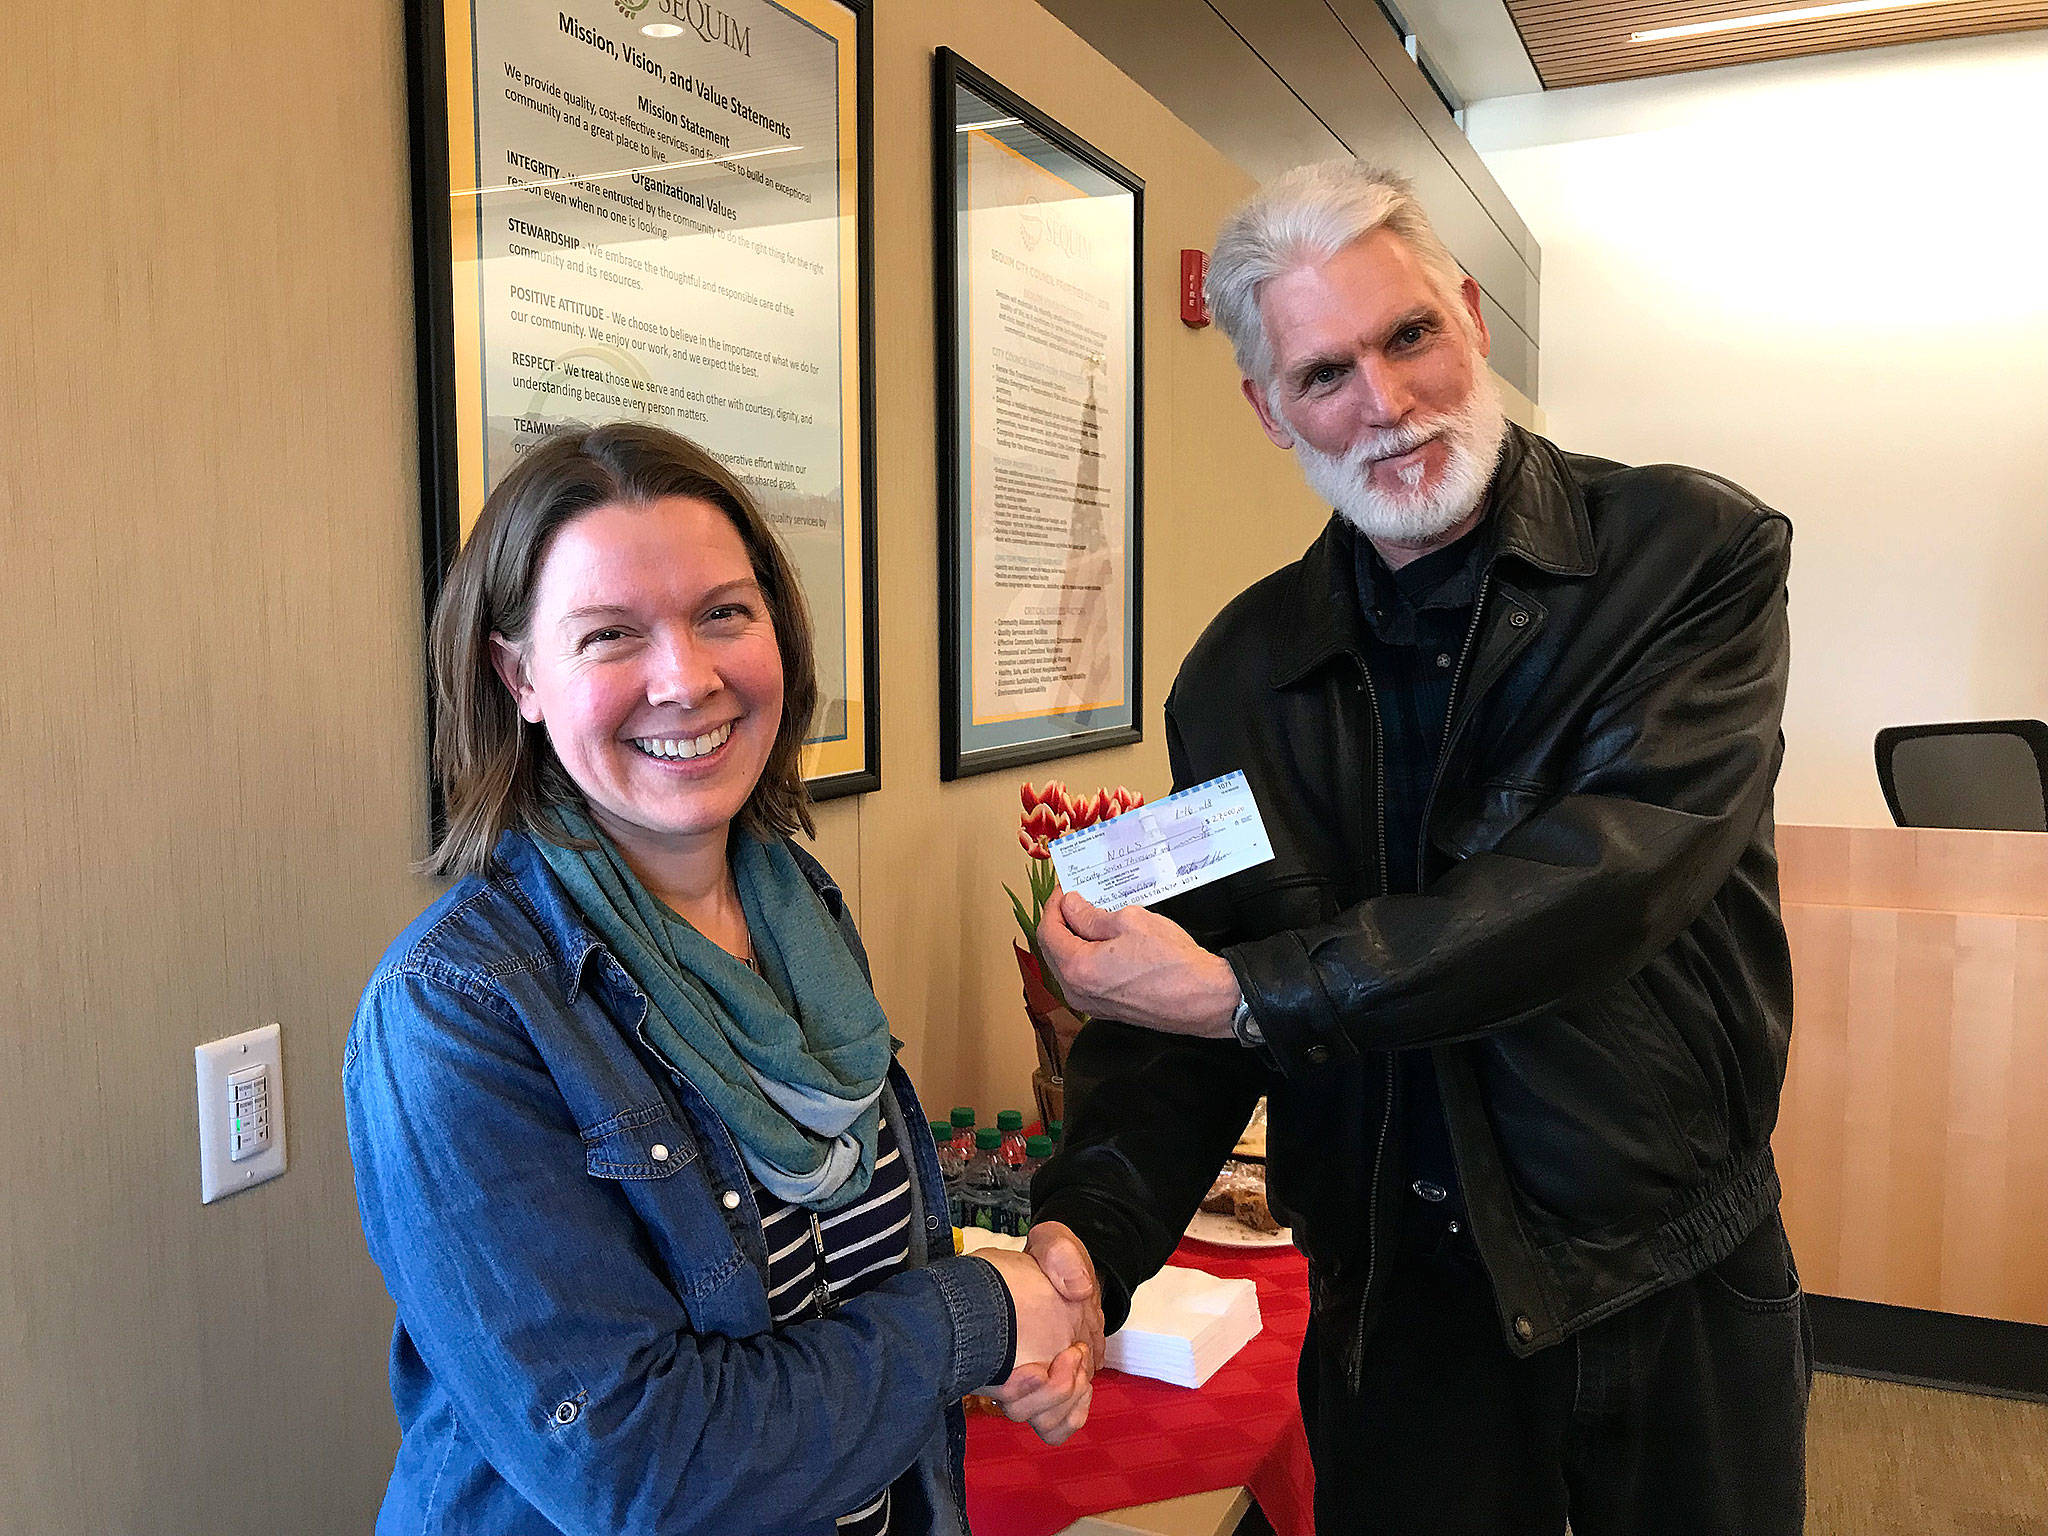 Emily Sly, Sequim Library’s branch manager, accepts a $27,000 check on Jan. 16 inside the Sequim Civic Center from Martin Shaw, treasurer for the Friends of Sequim Library. The donation comes from the Friends’ group’s monthly book sale and permanent sale inside the Sequim Library. Funds support the library’s entire program schedule, Sly said. Submitted photo